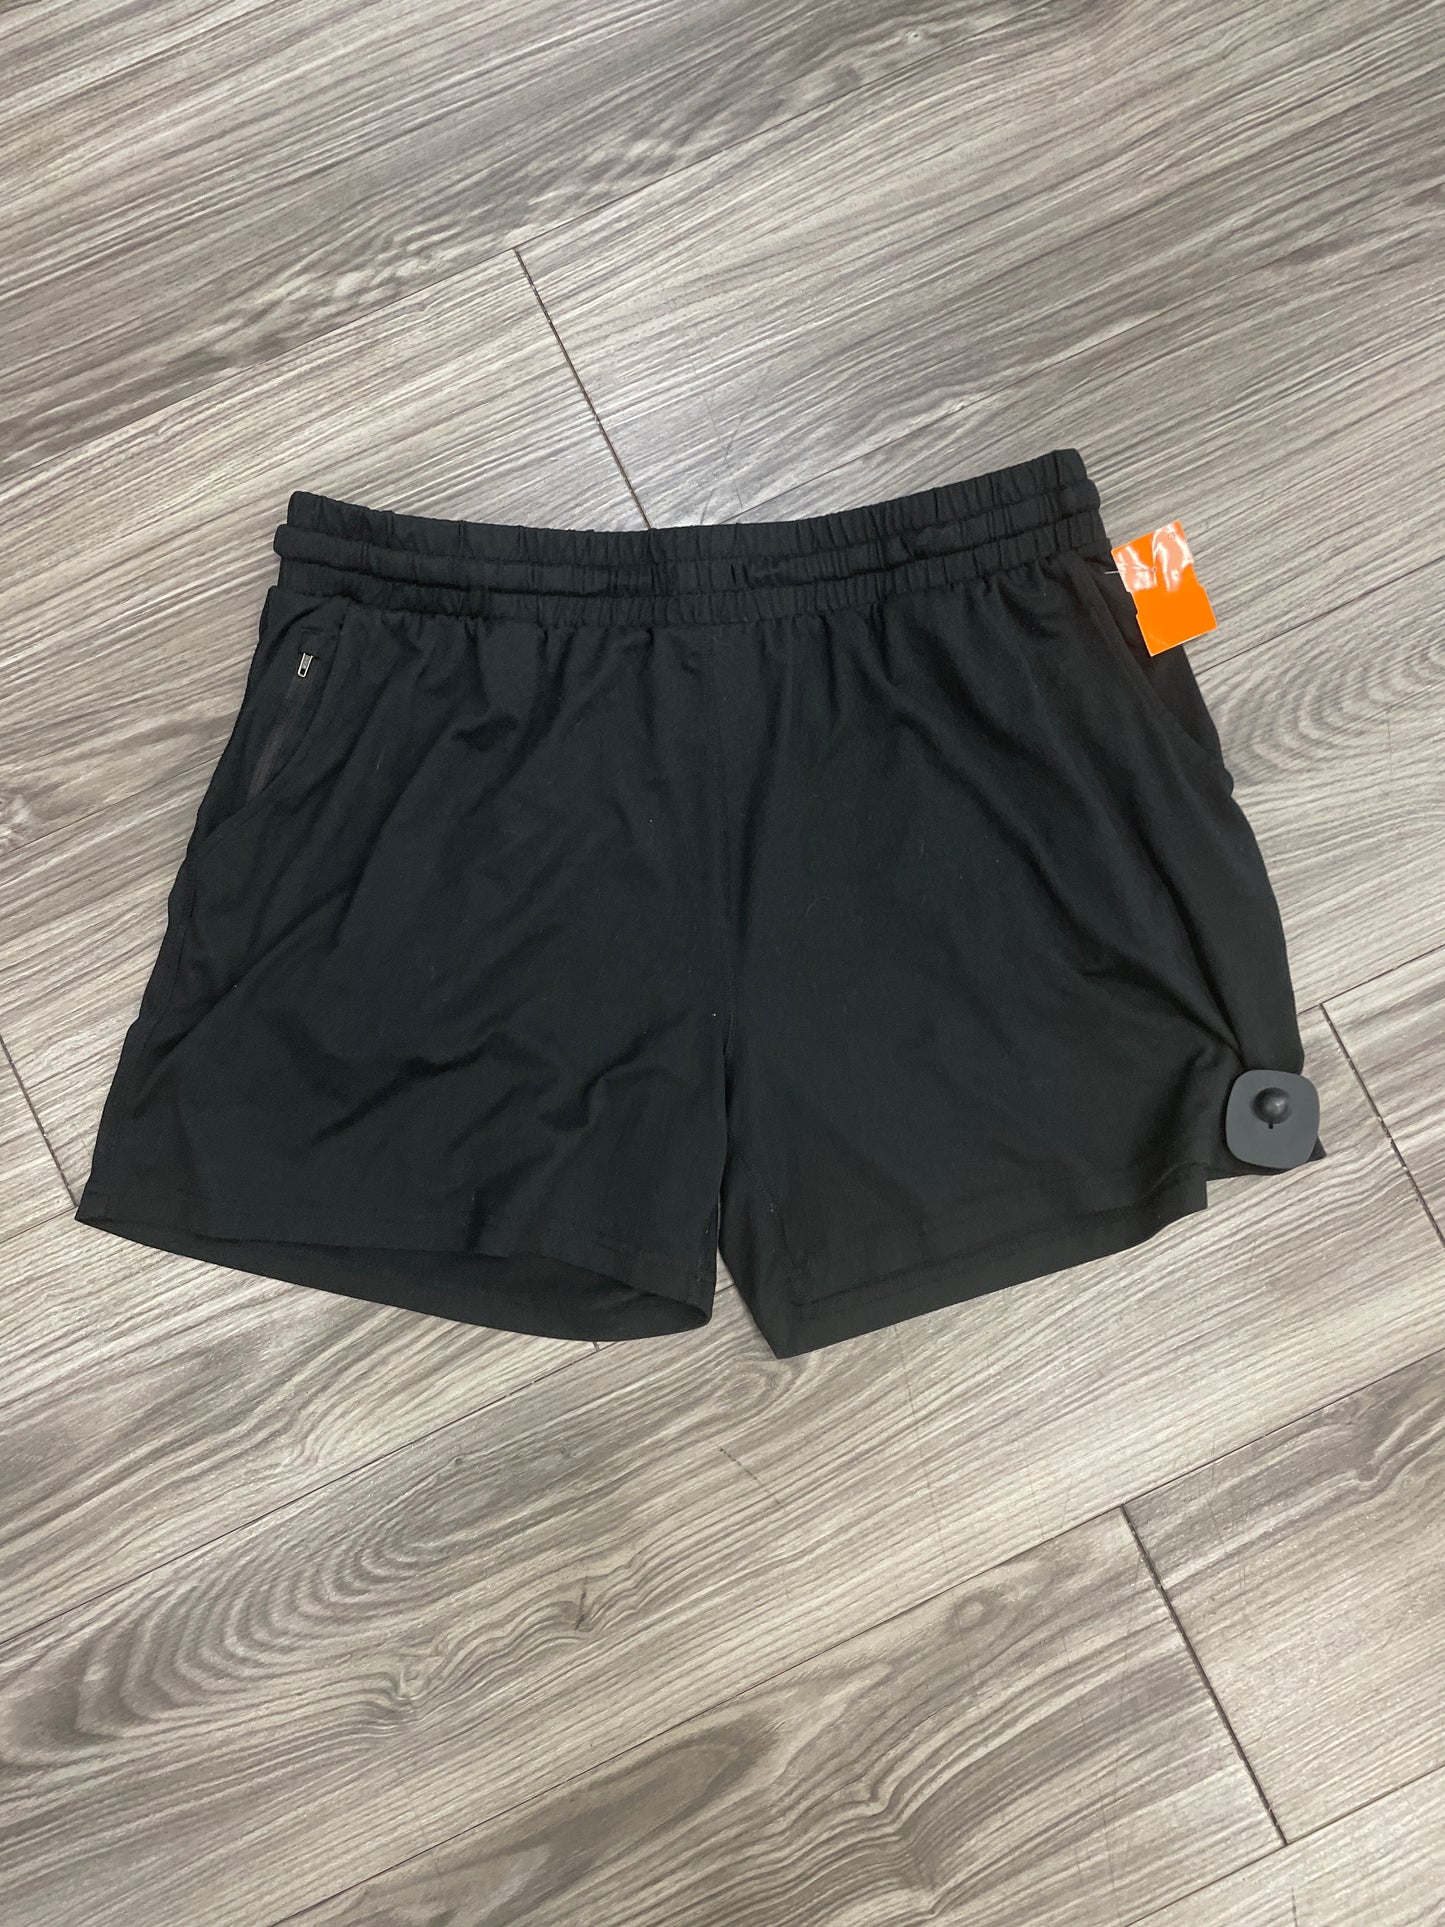 Athletic Shorts By Pacific Trail  Size: Xl